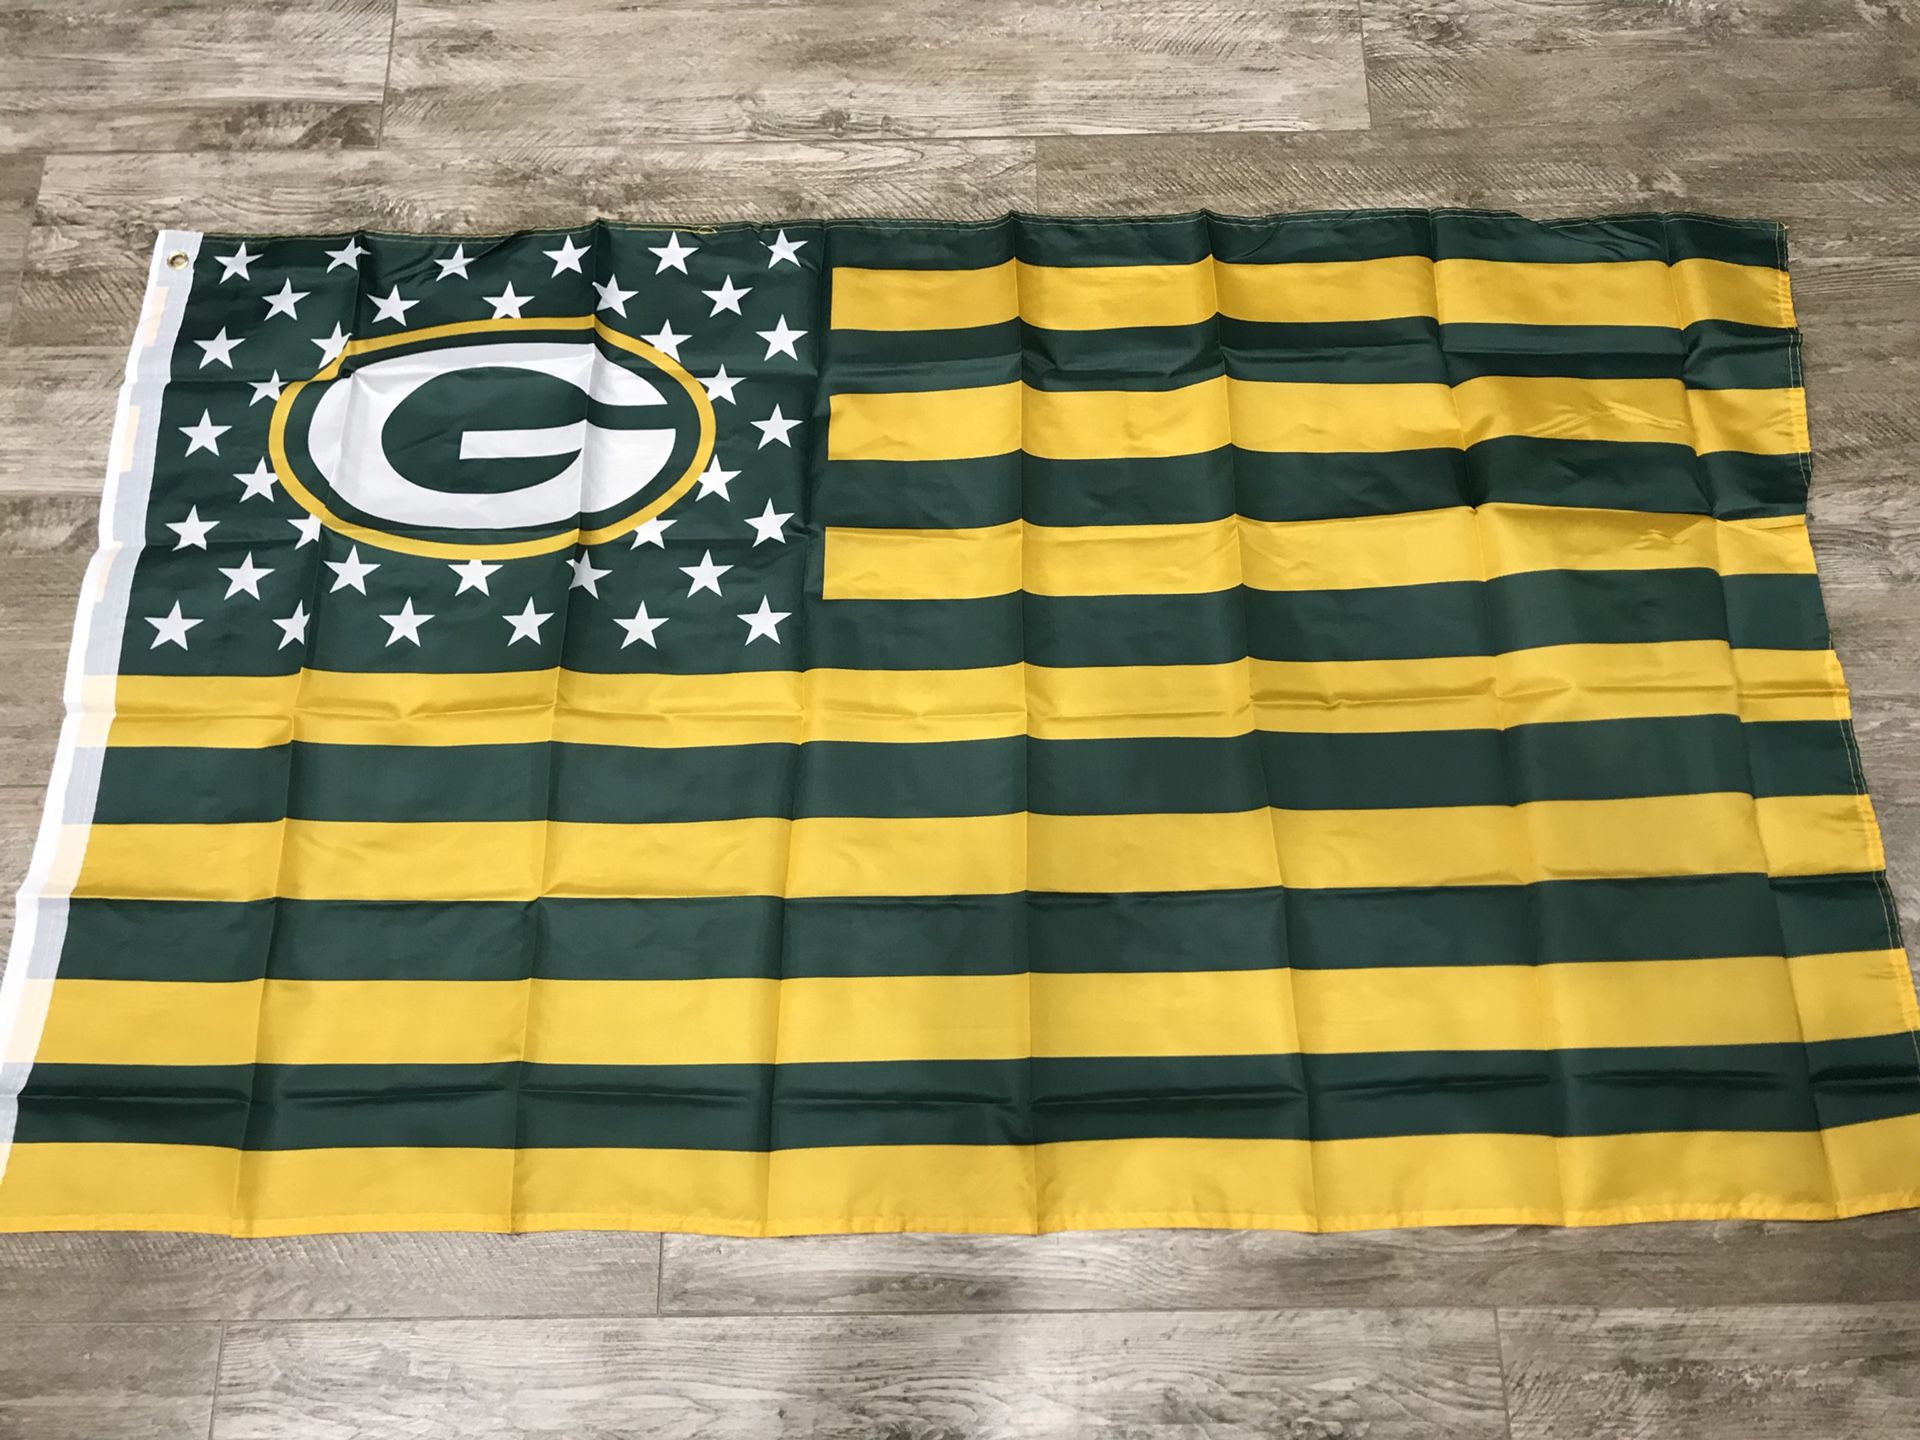 Green Bay Packers flag